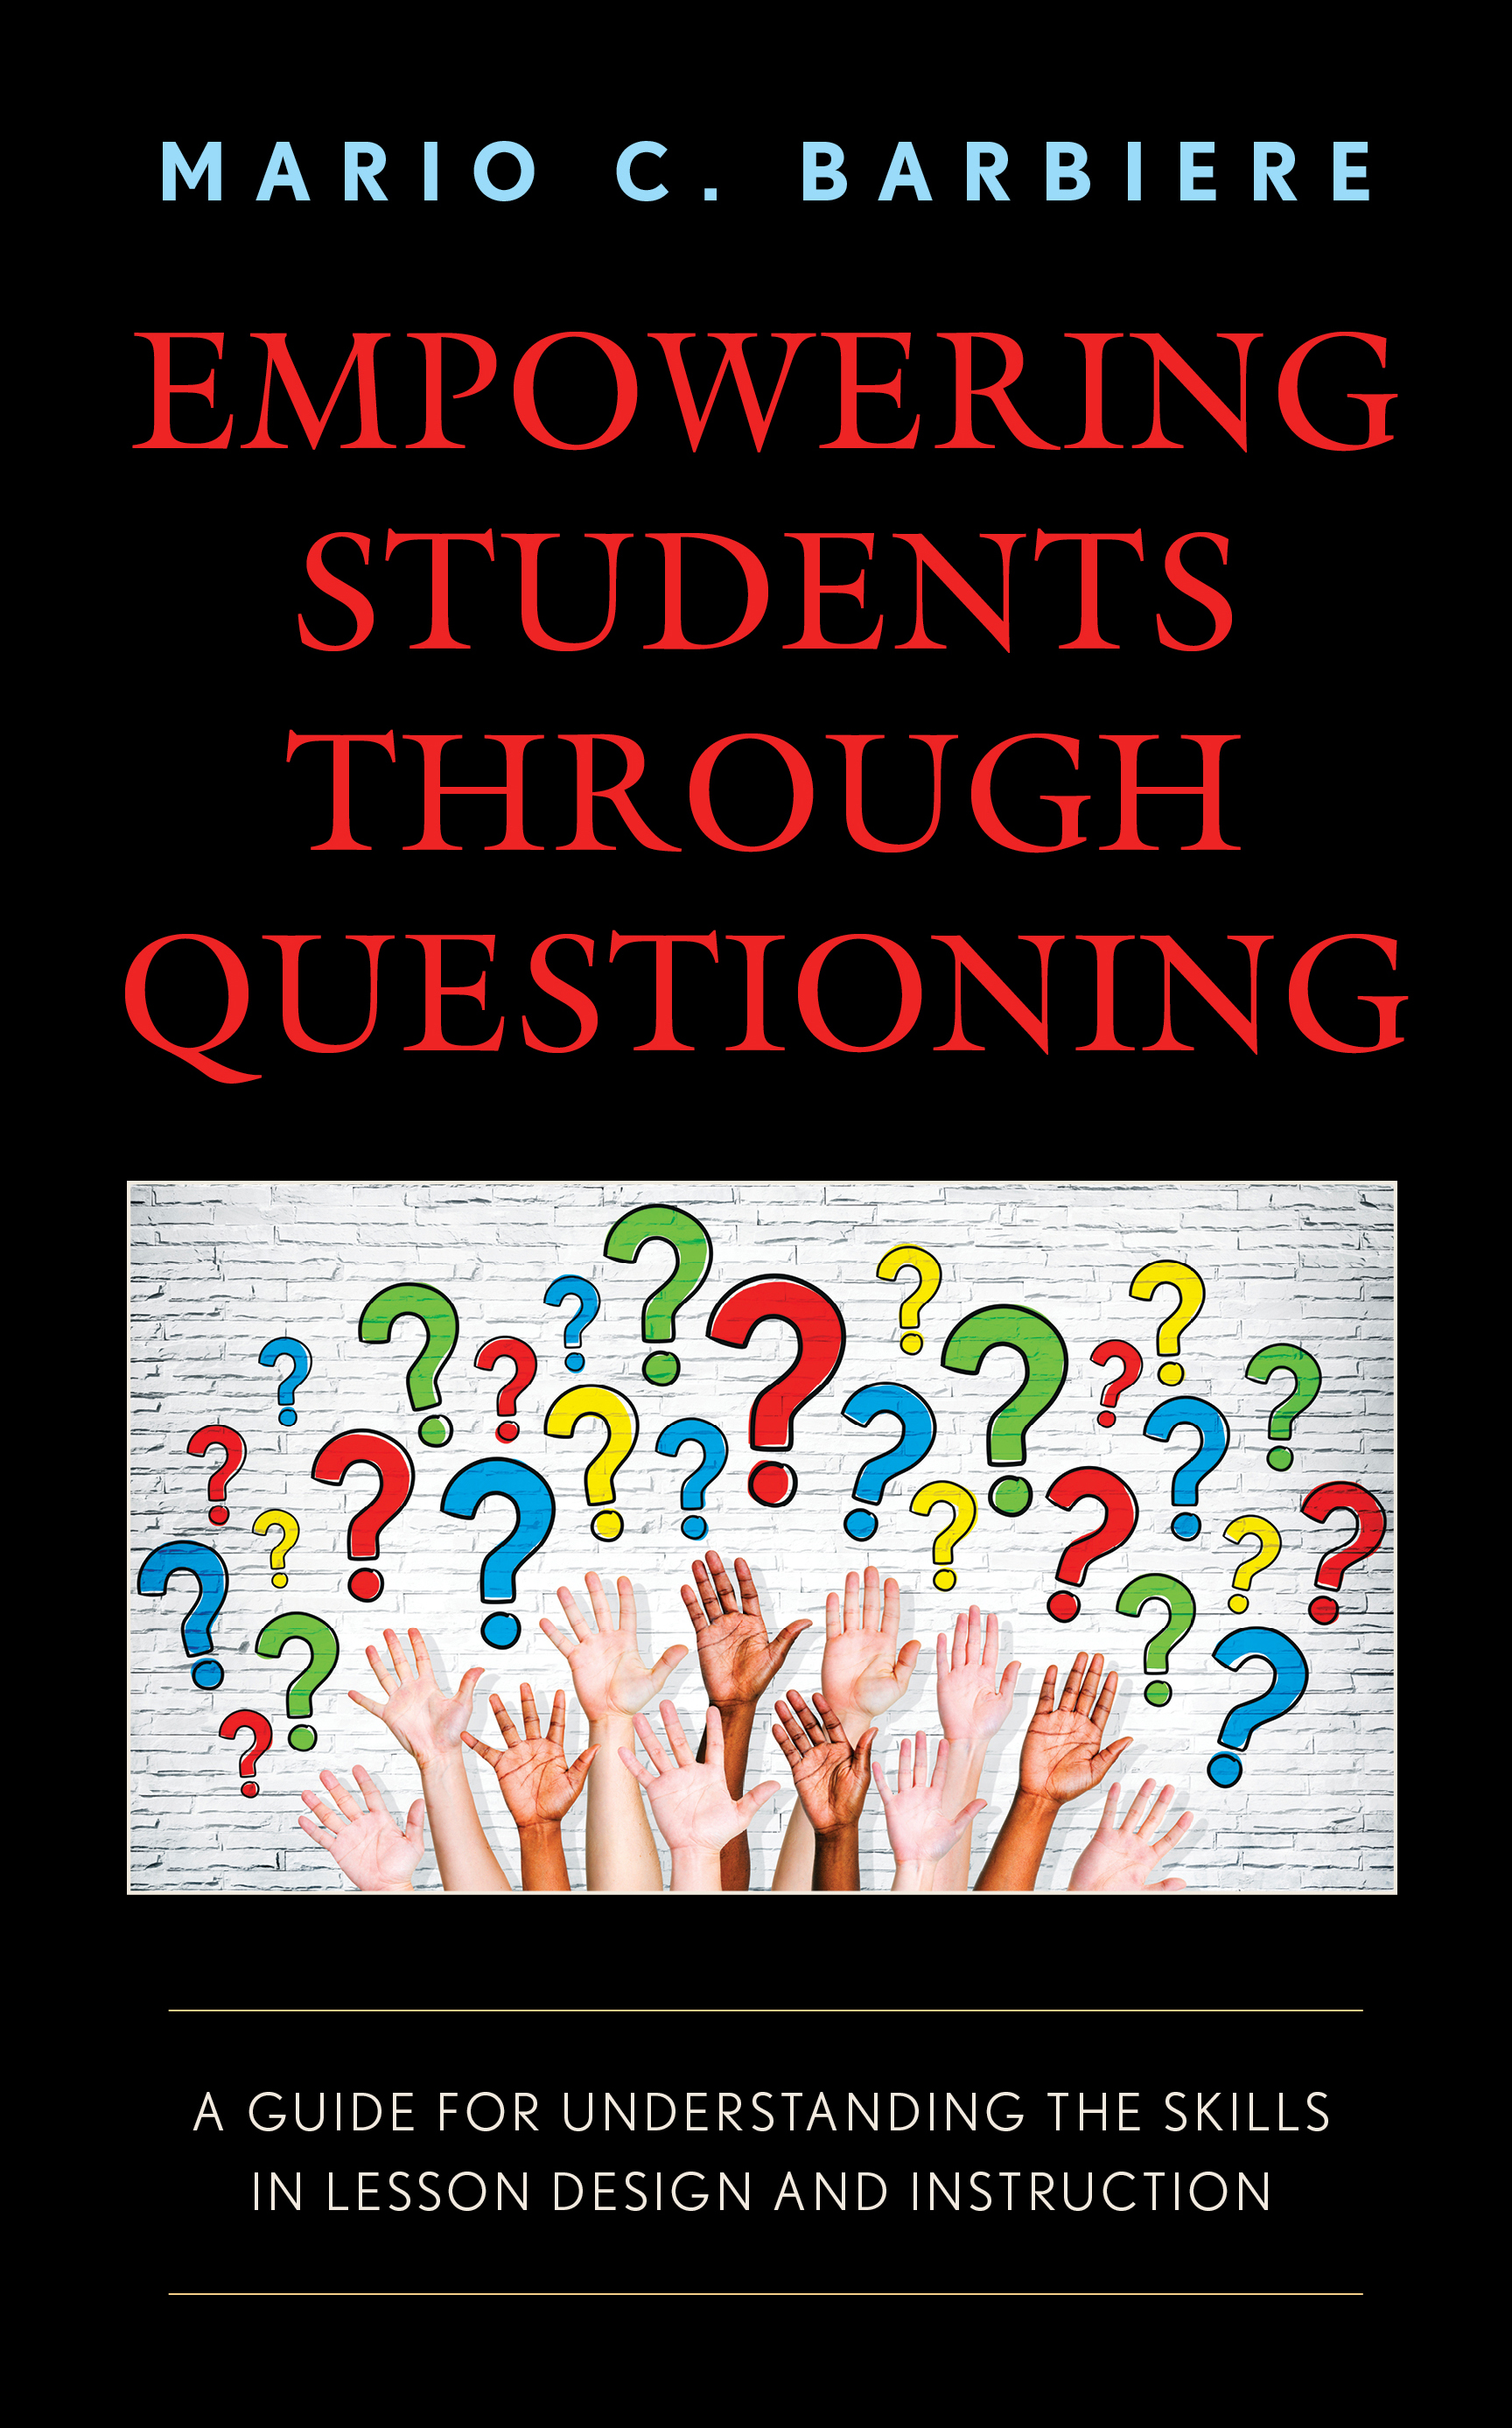 Empowering Students Through Questioning: A Guide for Understanding the Skills in Lesson Design and Instruction